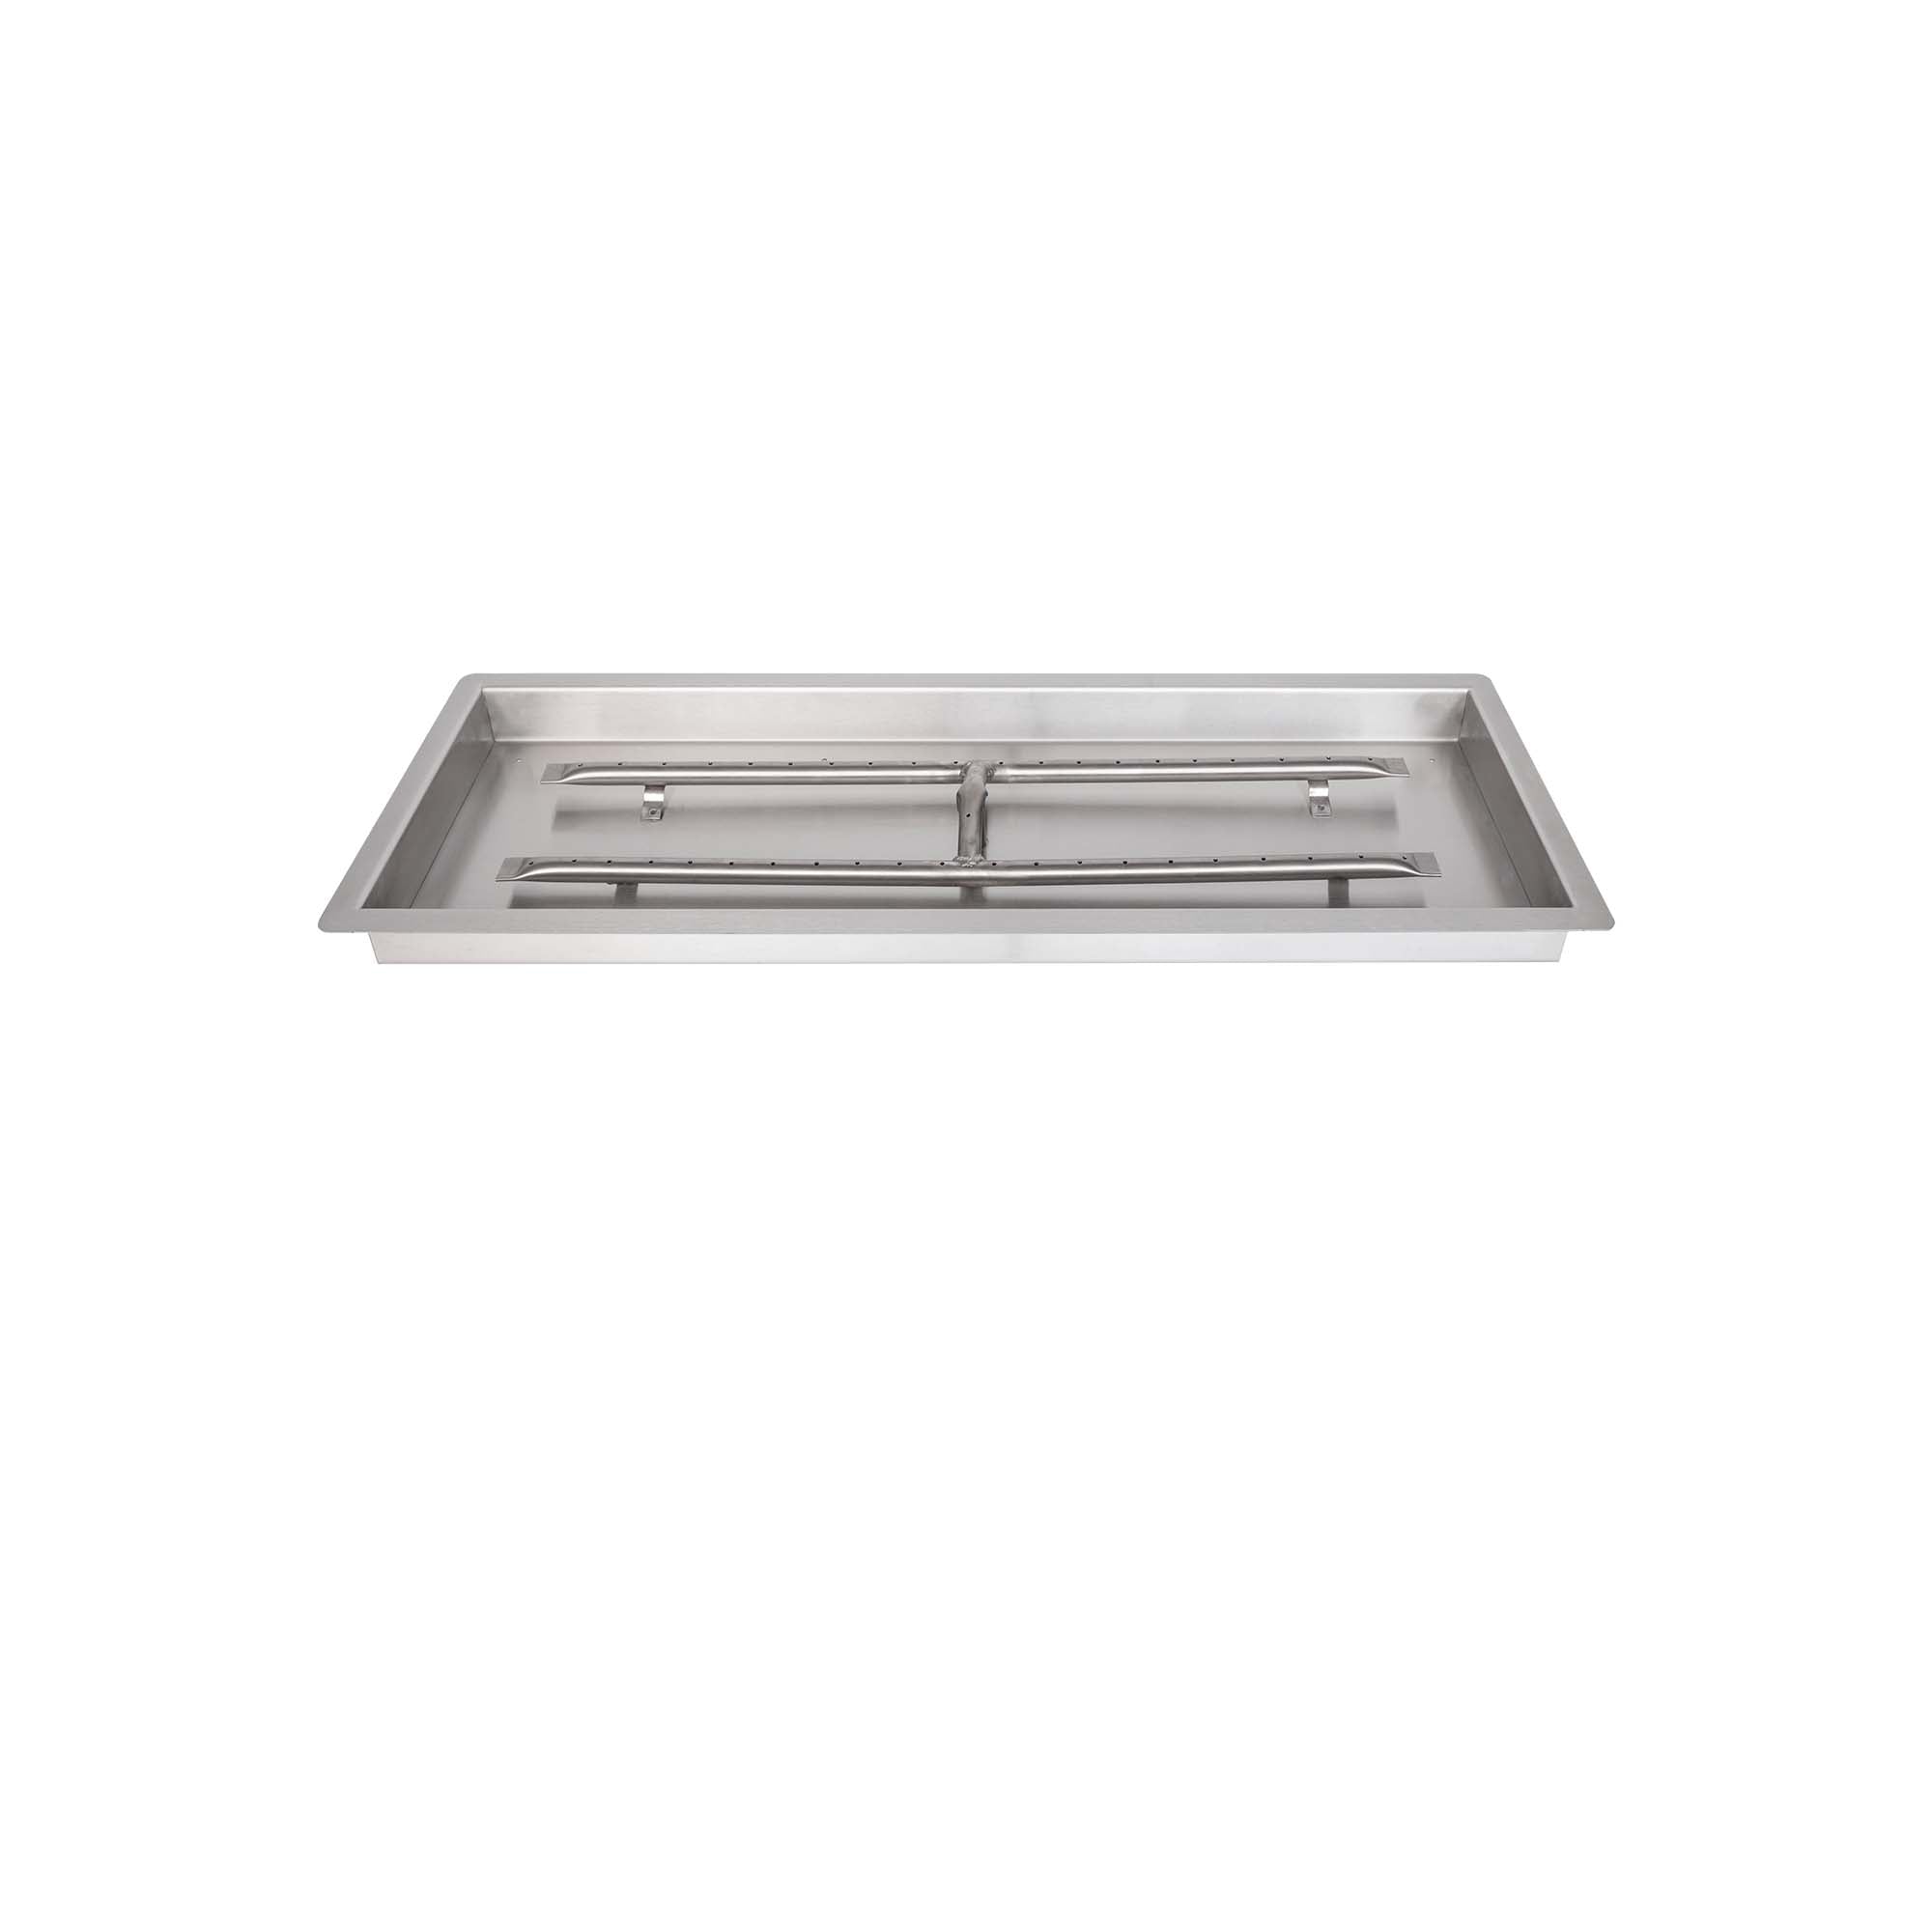 The Outdoor Plus Rectangular Drop In Pan with Stainless Steel 'H' Burner